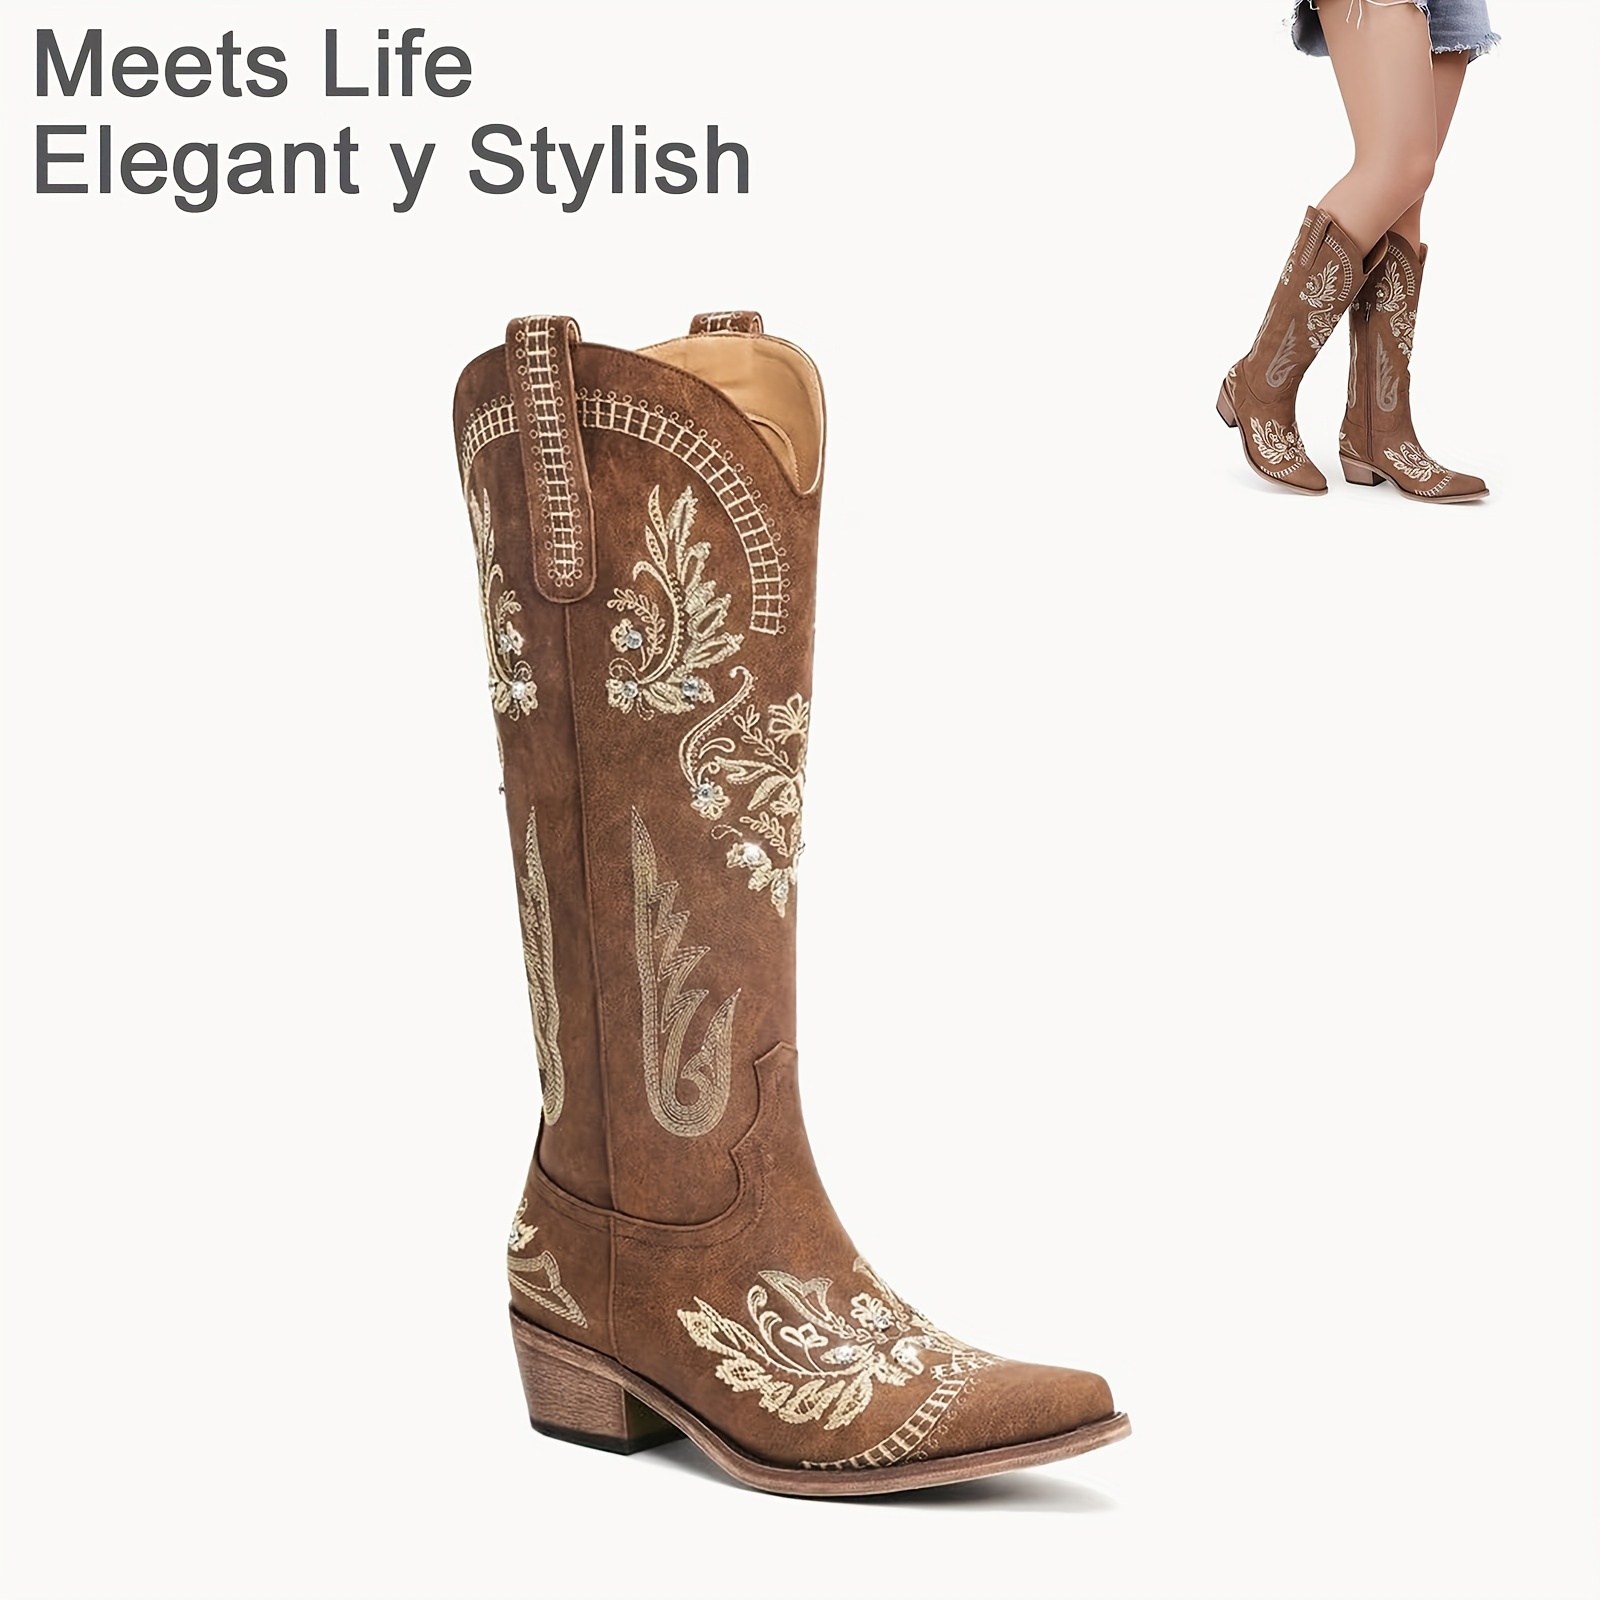 

Brown Cowboy Boots For Women - Wide Calf Knee High Cowgirl Boots, Glitter Sparkly Rhinestone Boots With Classic Embroidery, Pointed Toe Pull On Zipper Retro Fashion Tall Boots